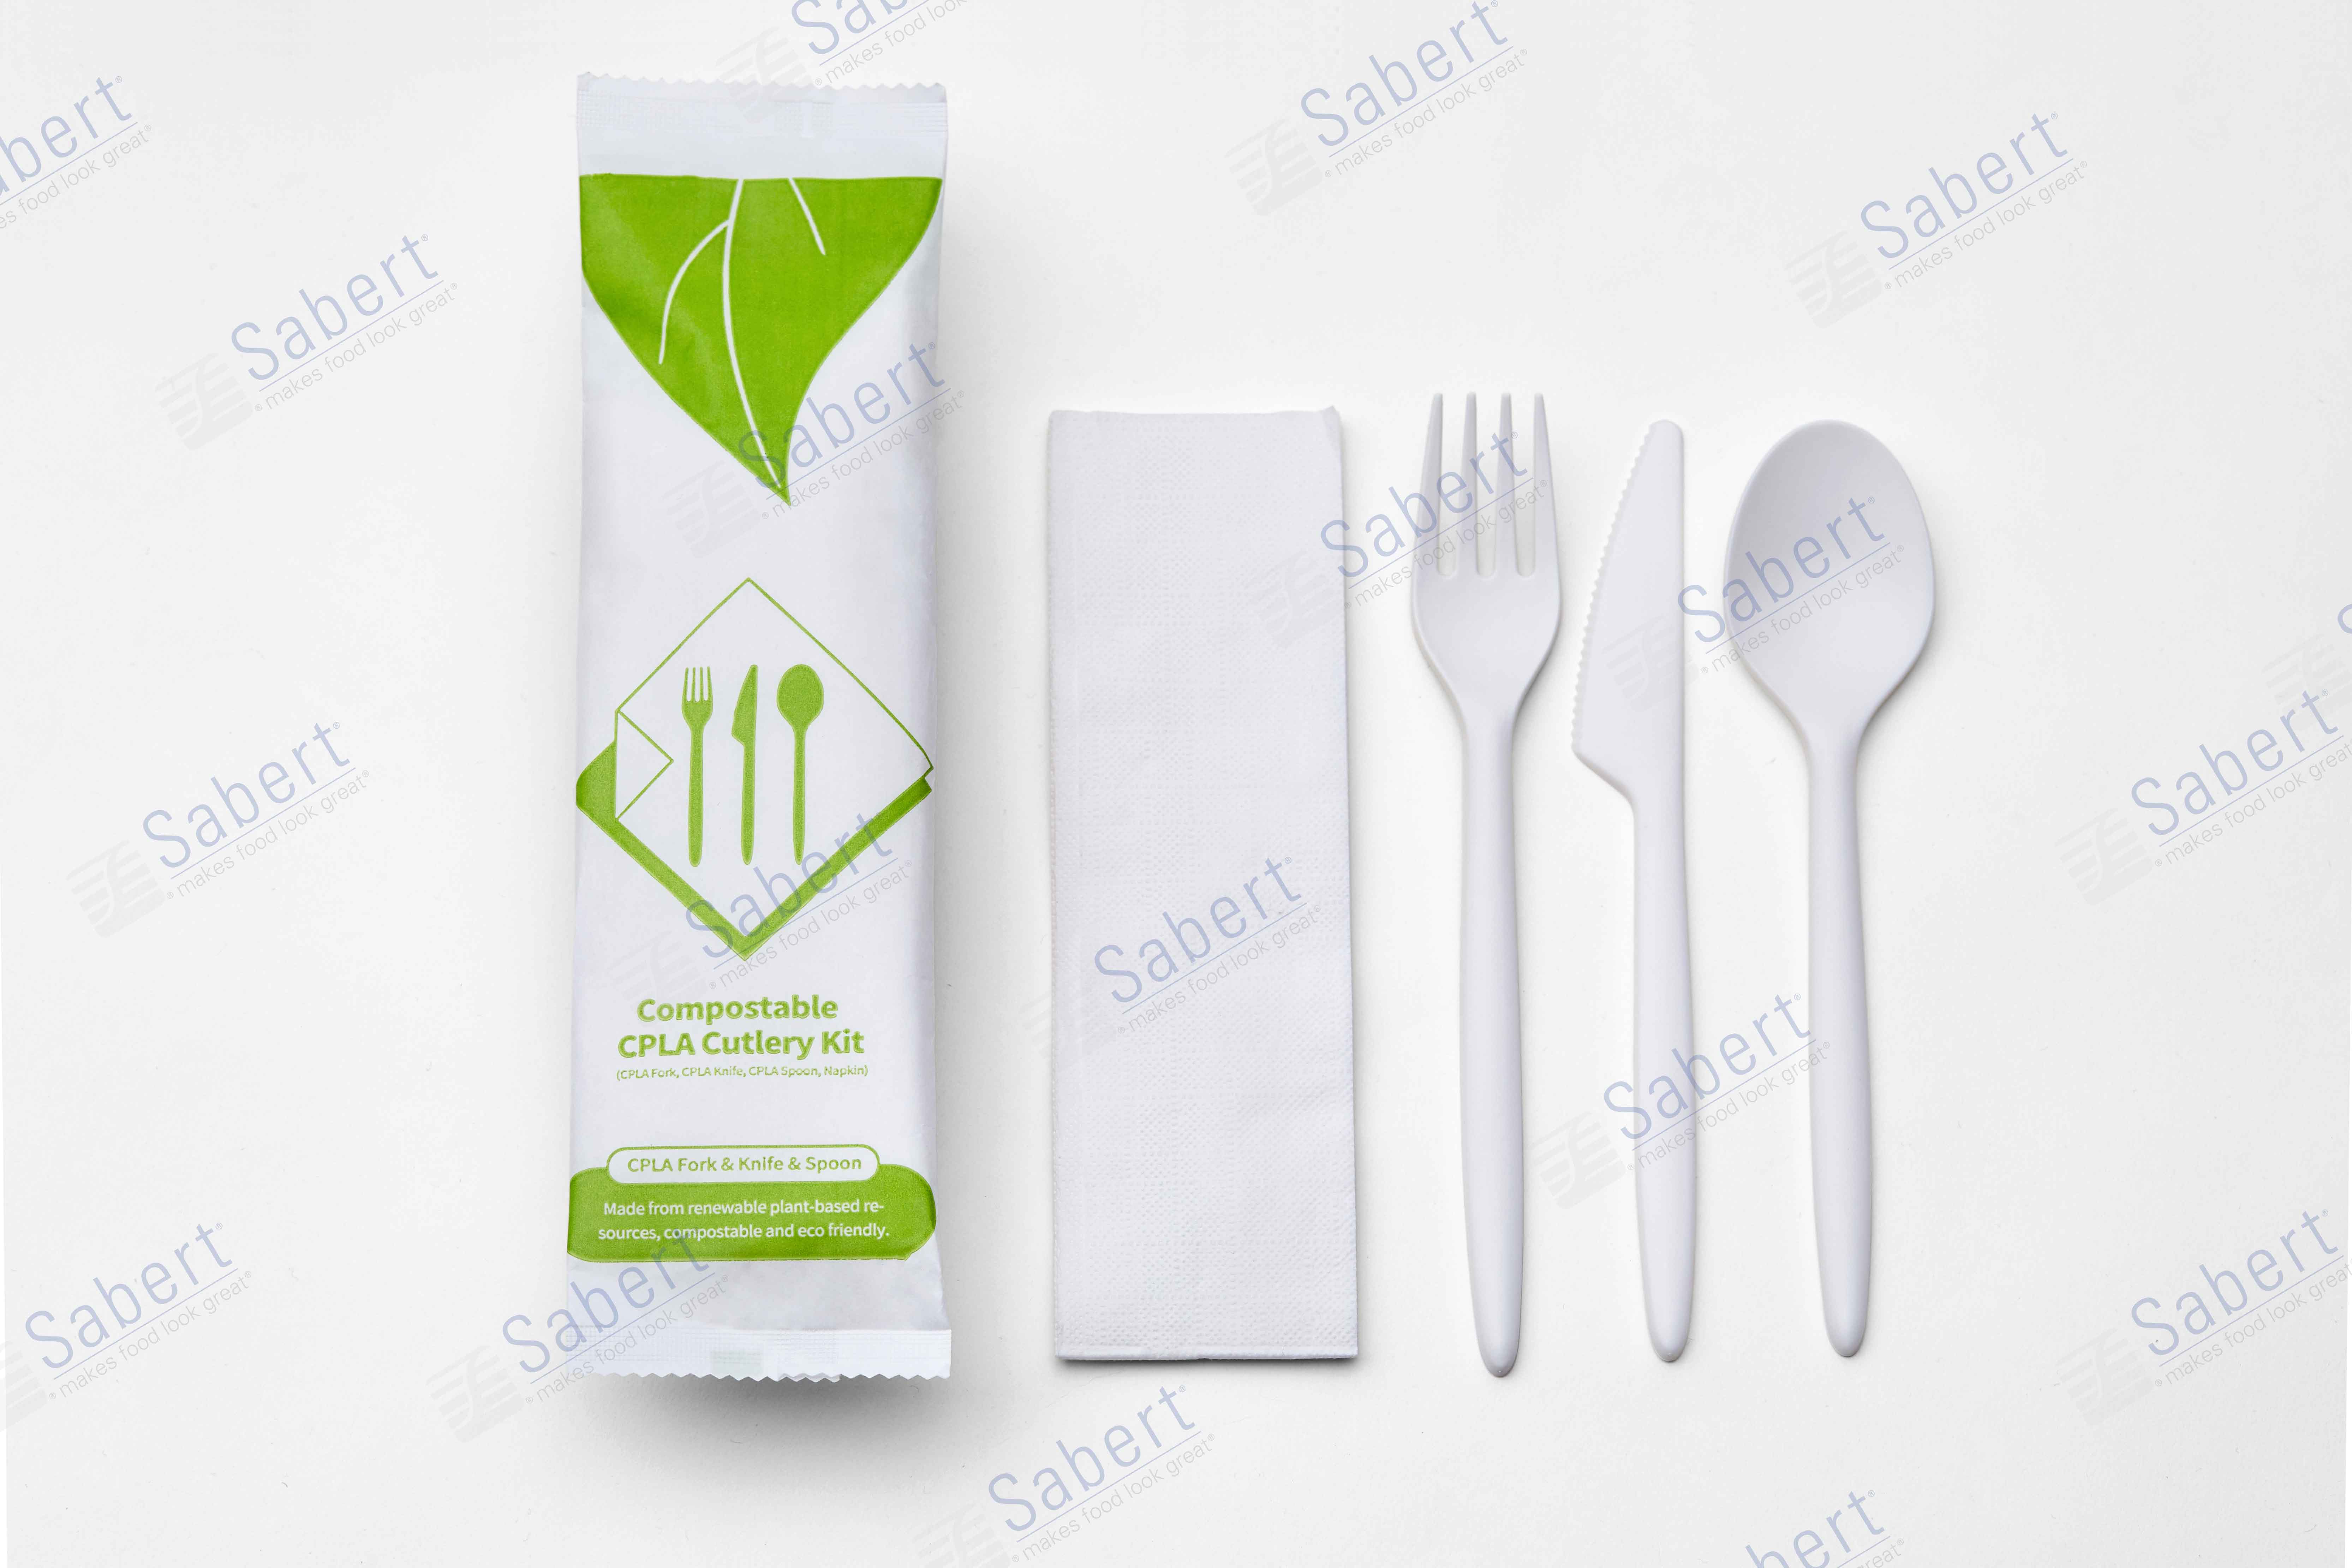 Compostable CPLA Cutlery Kit 4 in 1(CPLA Fork, CPLA Knife, CPLA Spoon, Napkin) - white paper pack 